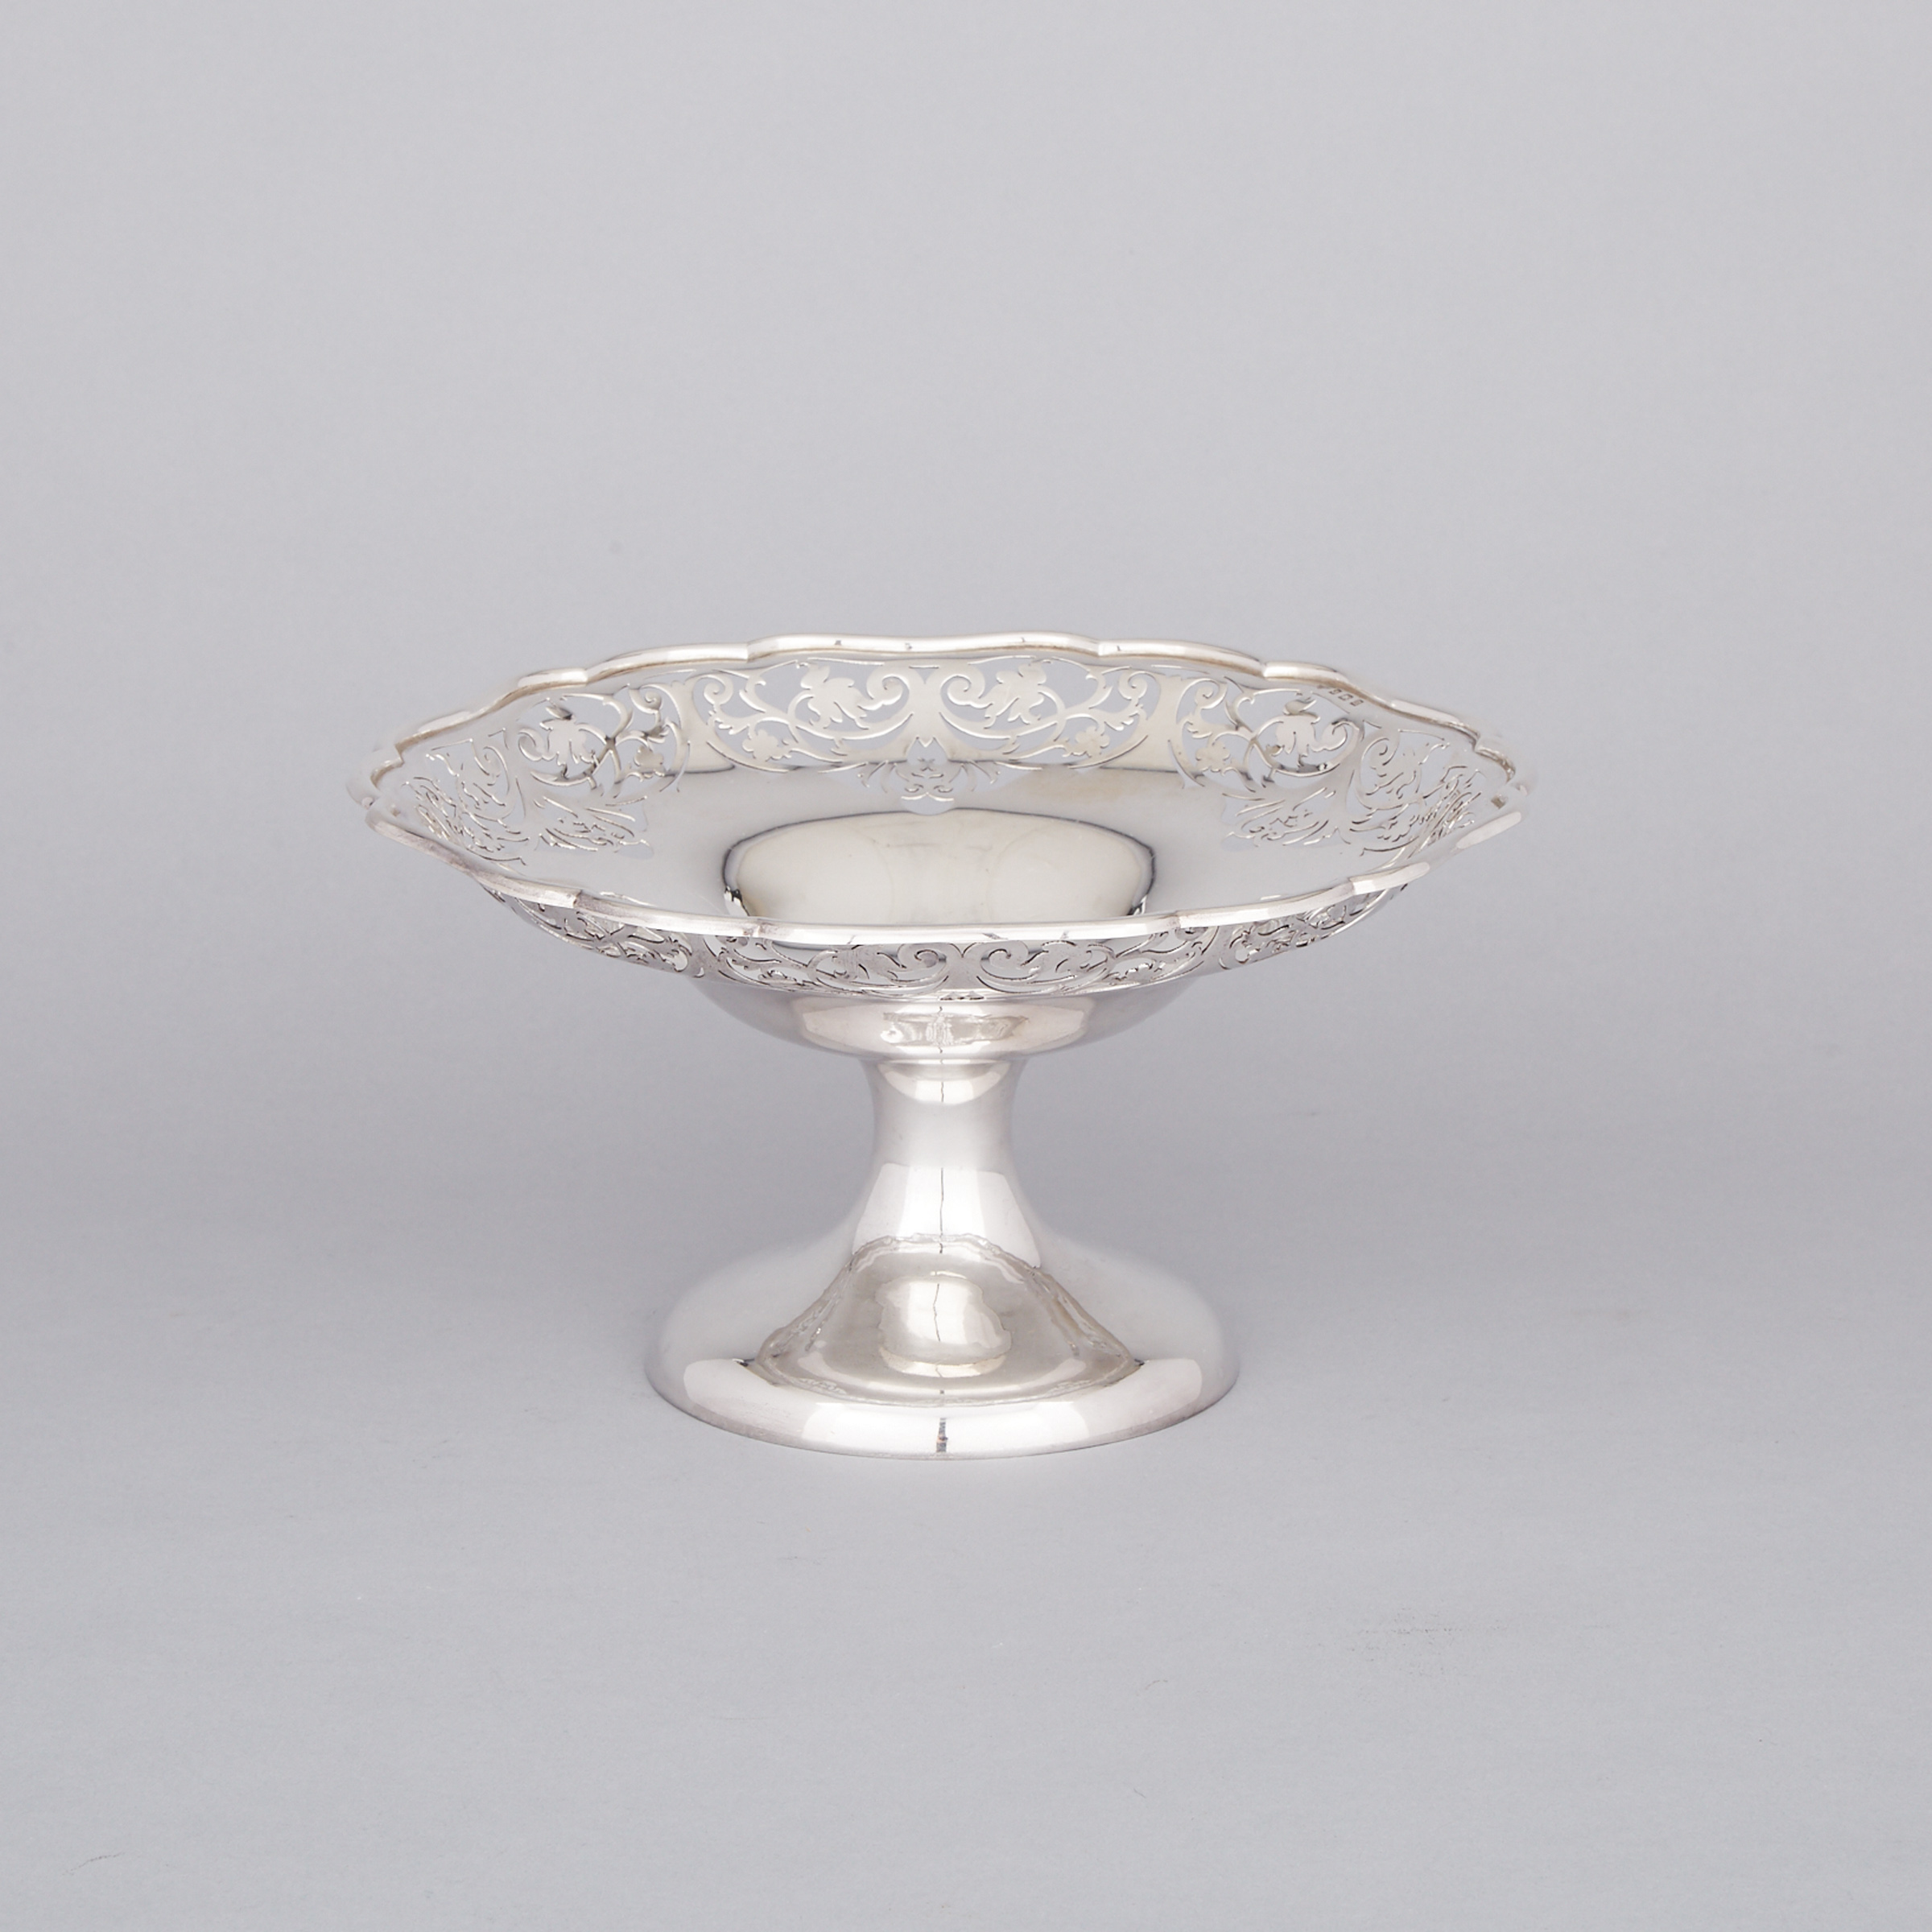 English Silver Pierced Footed Comport, Charles S. Green & Co., Birmingham, 1912